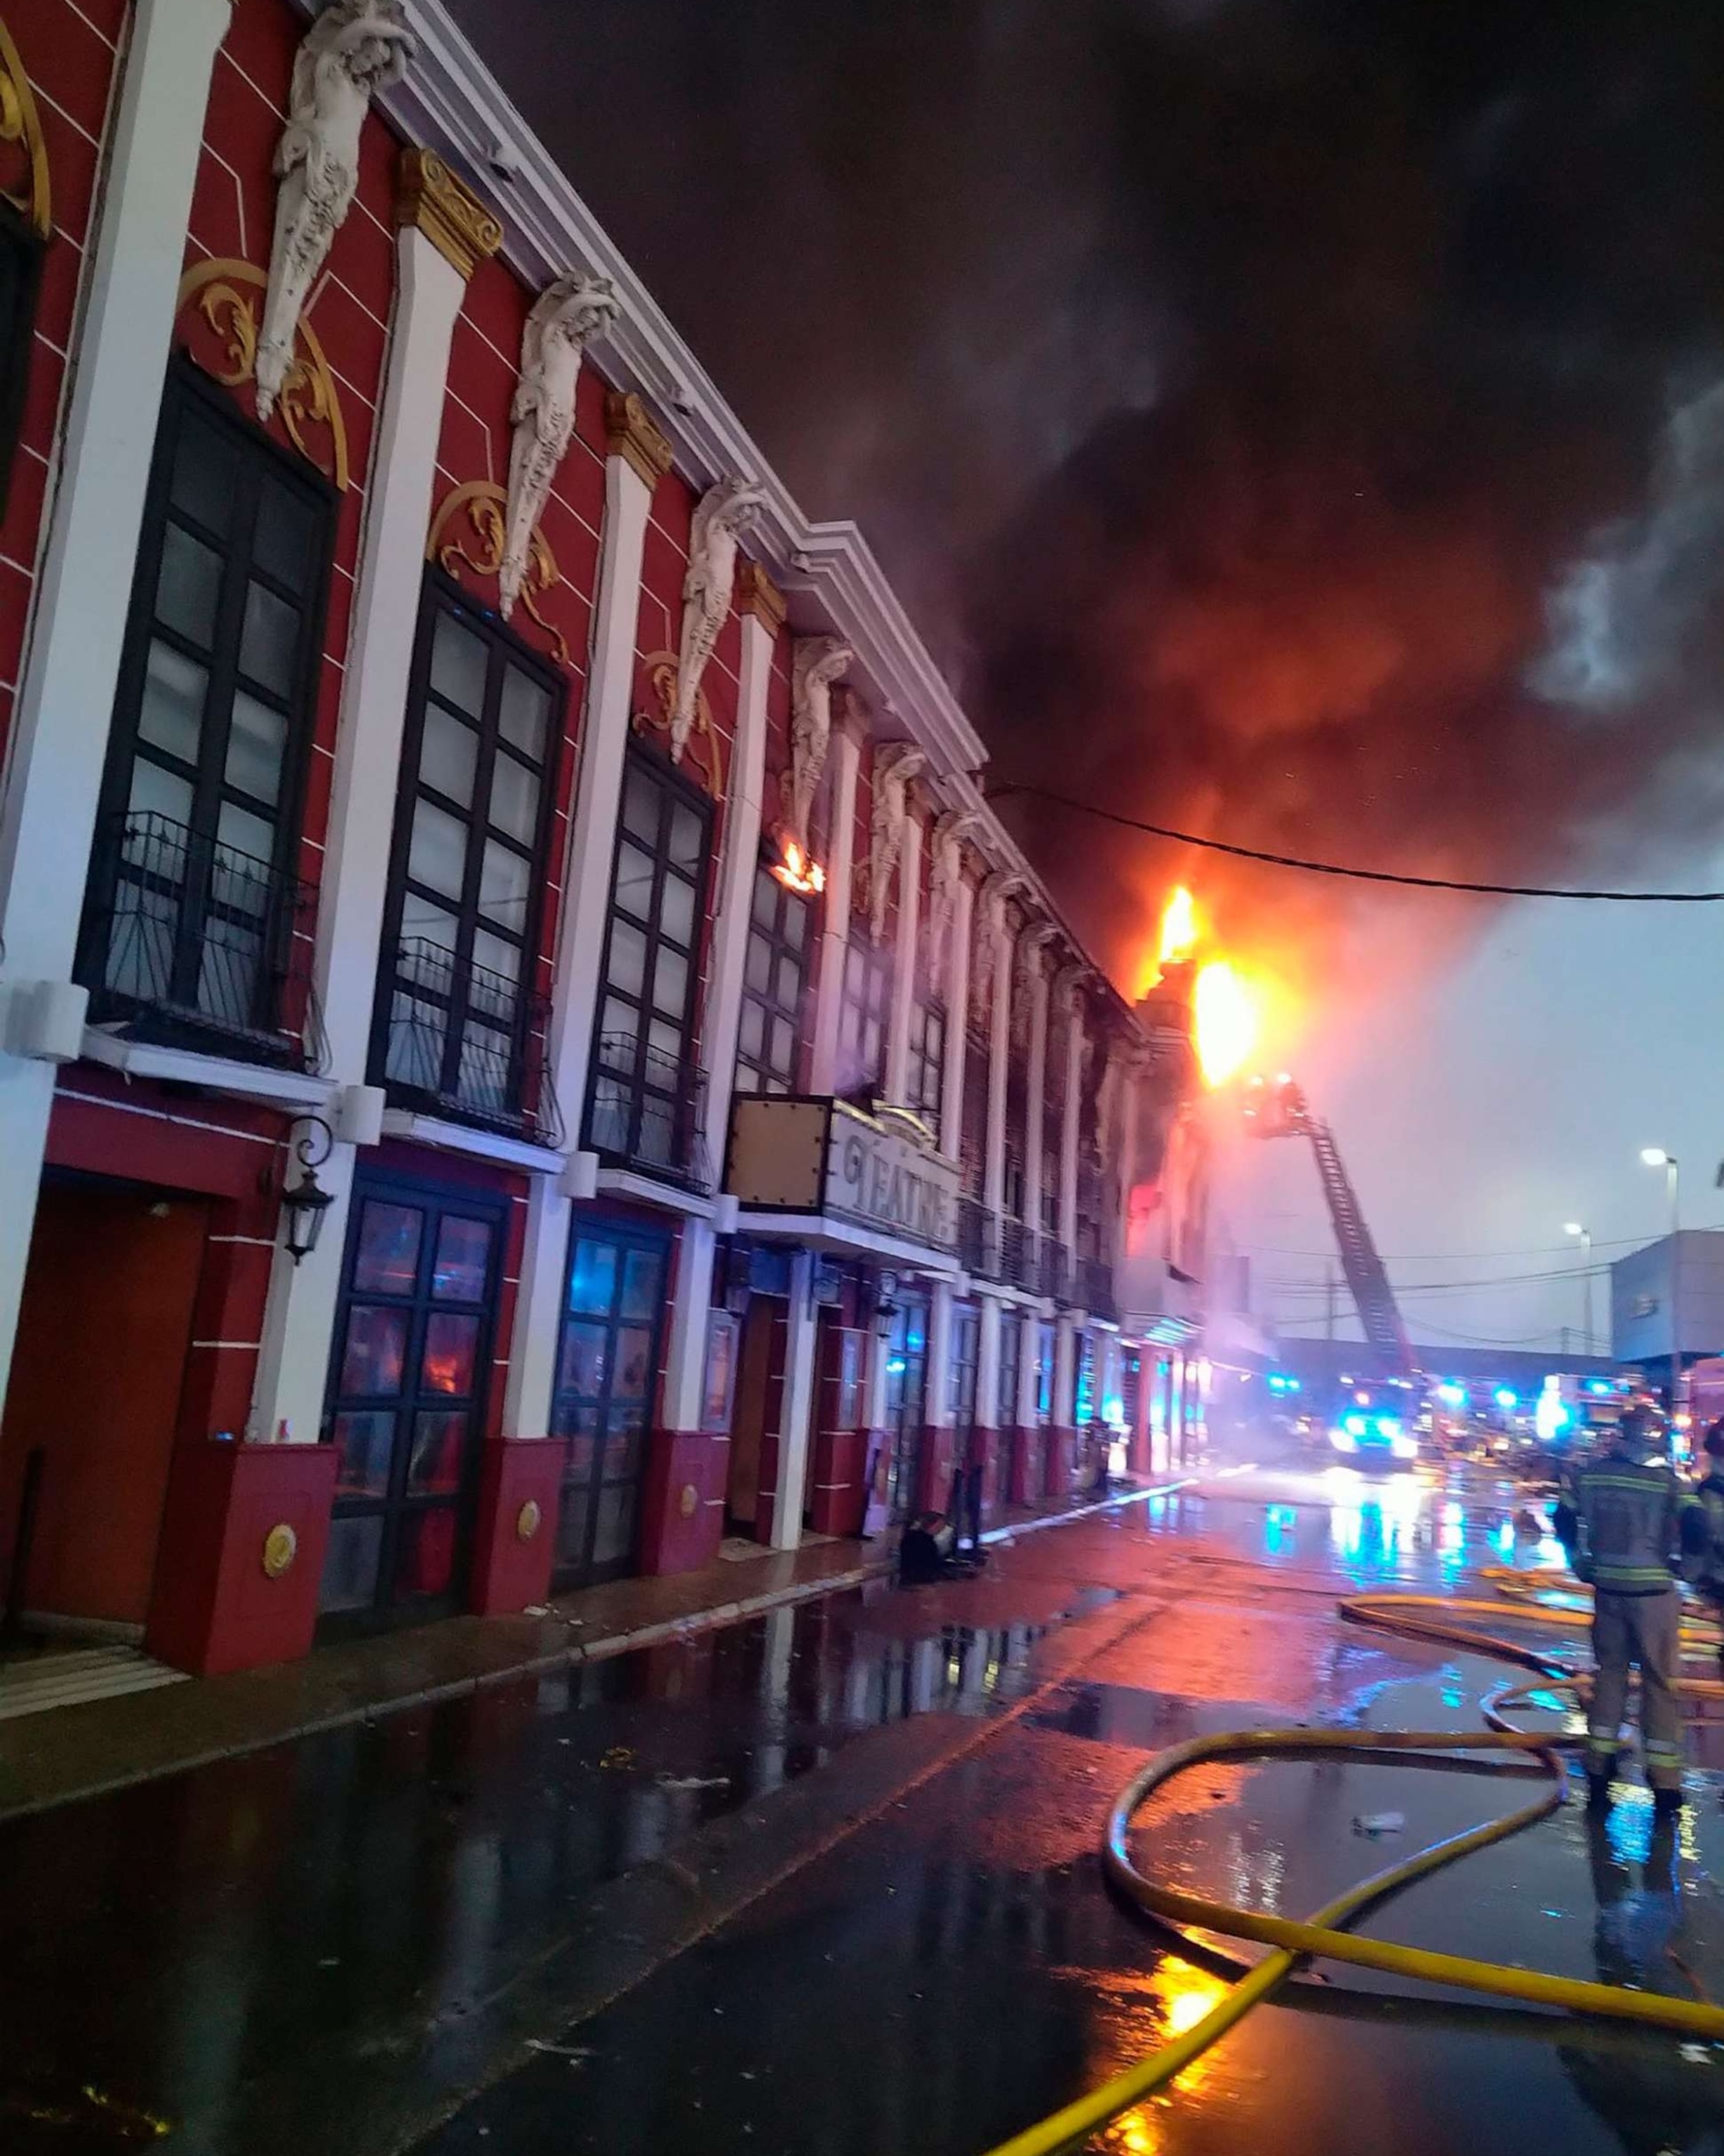 PHOTO: In this photo provided by Bomberos/Ayuntamiento de Murcia, firefighters work outside a nightclub on fire in Murcia, south-eastern Spain in the early hours of Sunday Oct. 1, 2023.